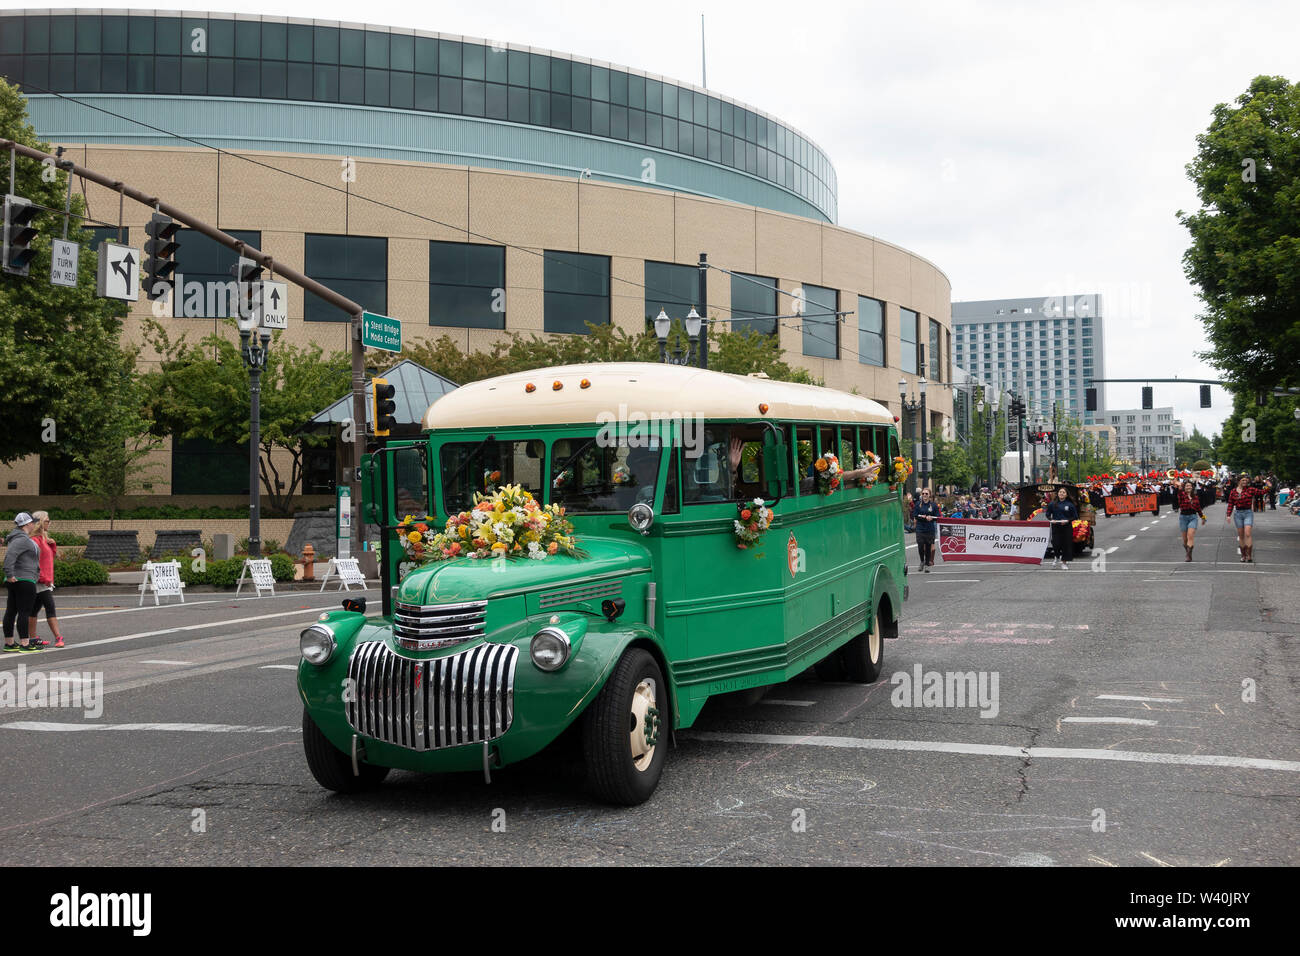 Vintage tour bus in Rose Festival Parade in Portland Stock Photo